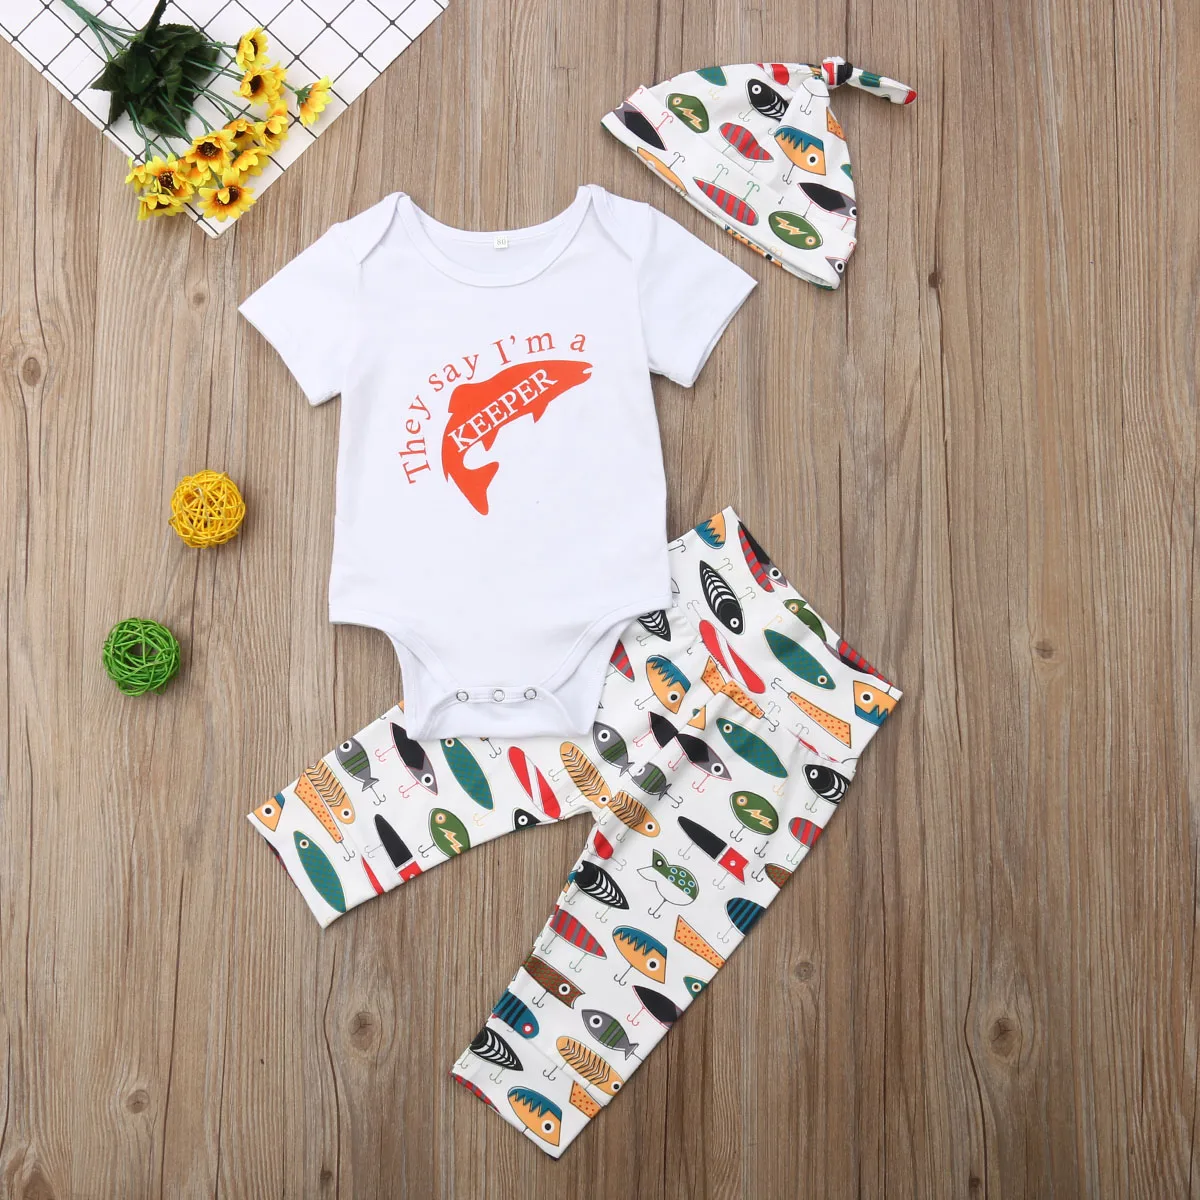 Boys Fish Printed Romper Set Short Sleeve Fish and Letter Printed Tops with Printed Long Pants and Hat